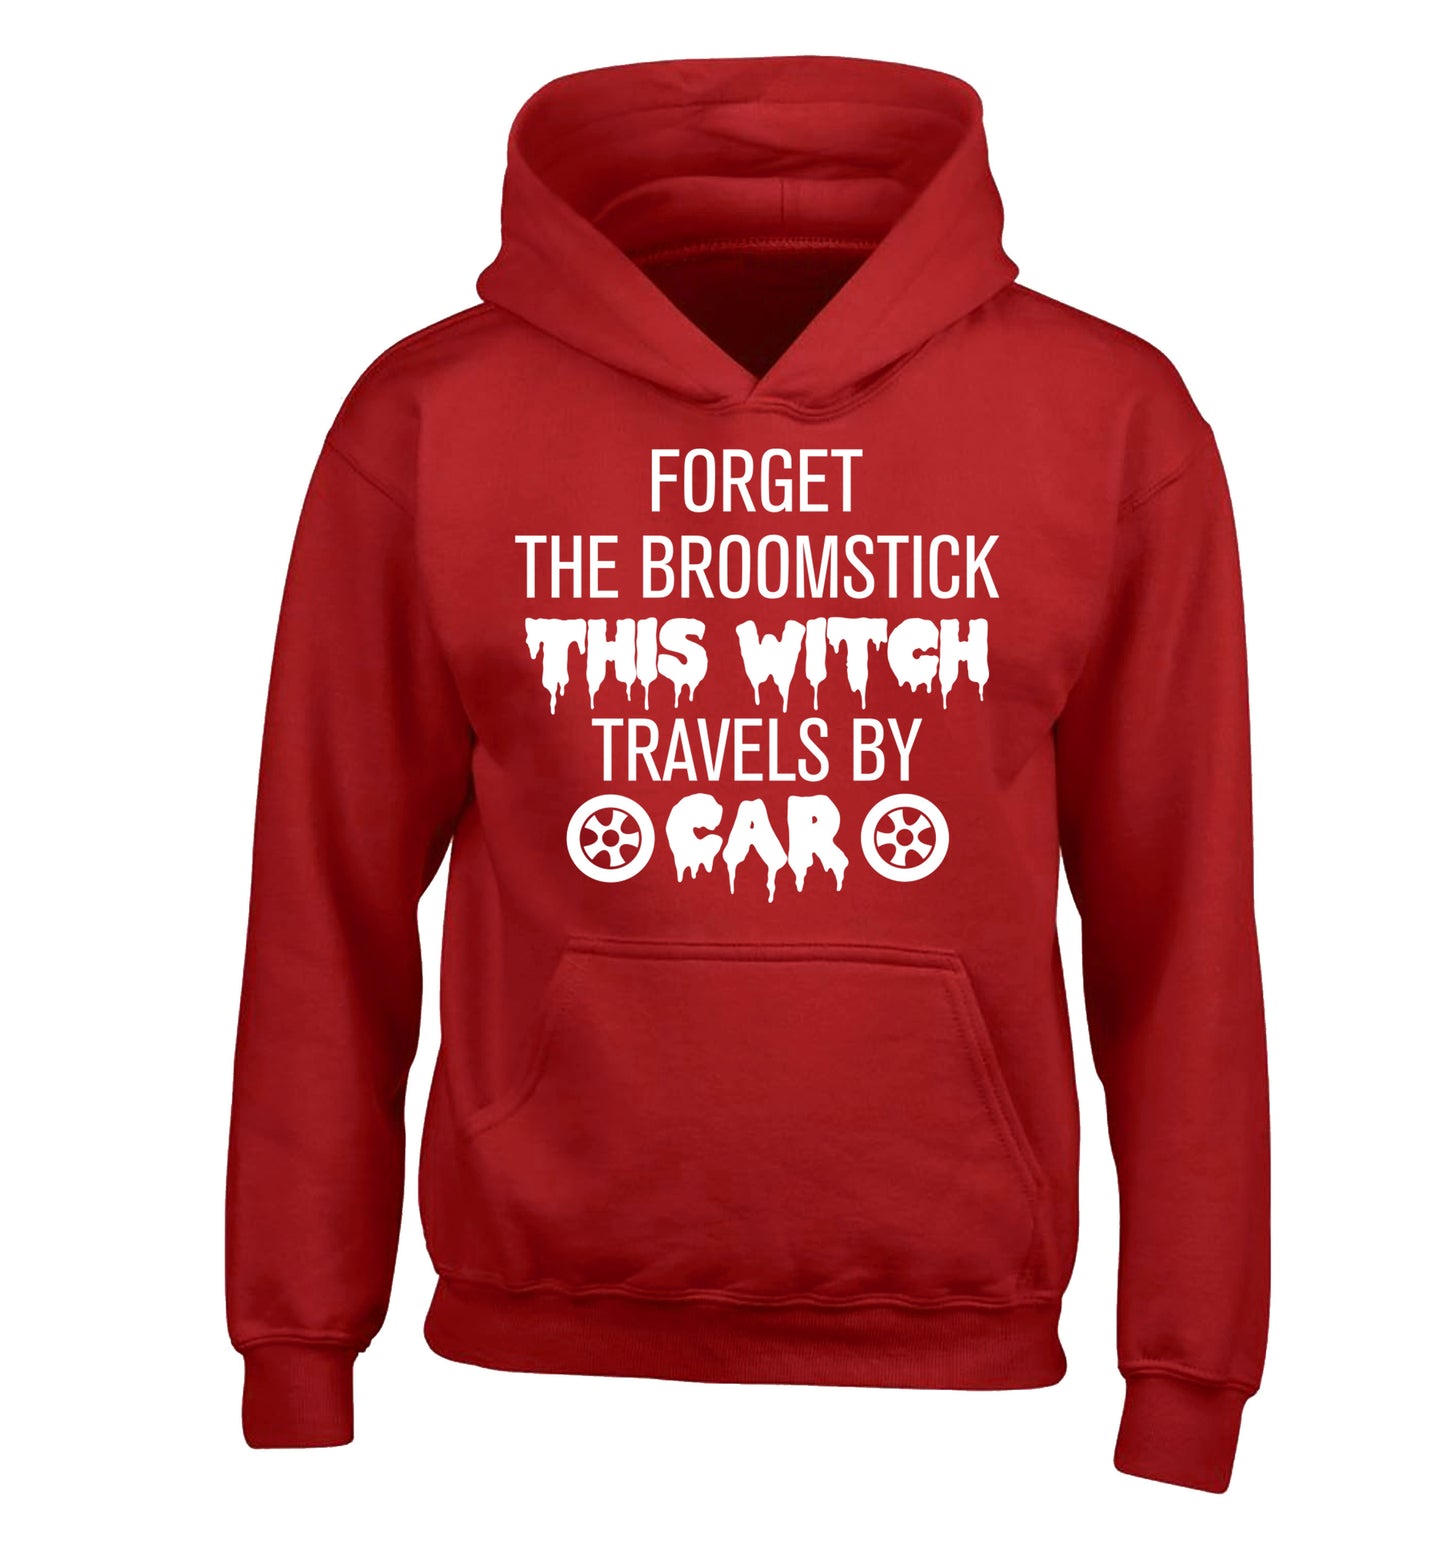 Forget the broomstick this witch travels by car children's red hoodie 12-14 Years